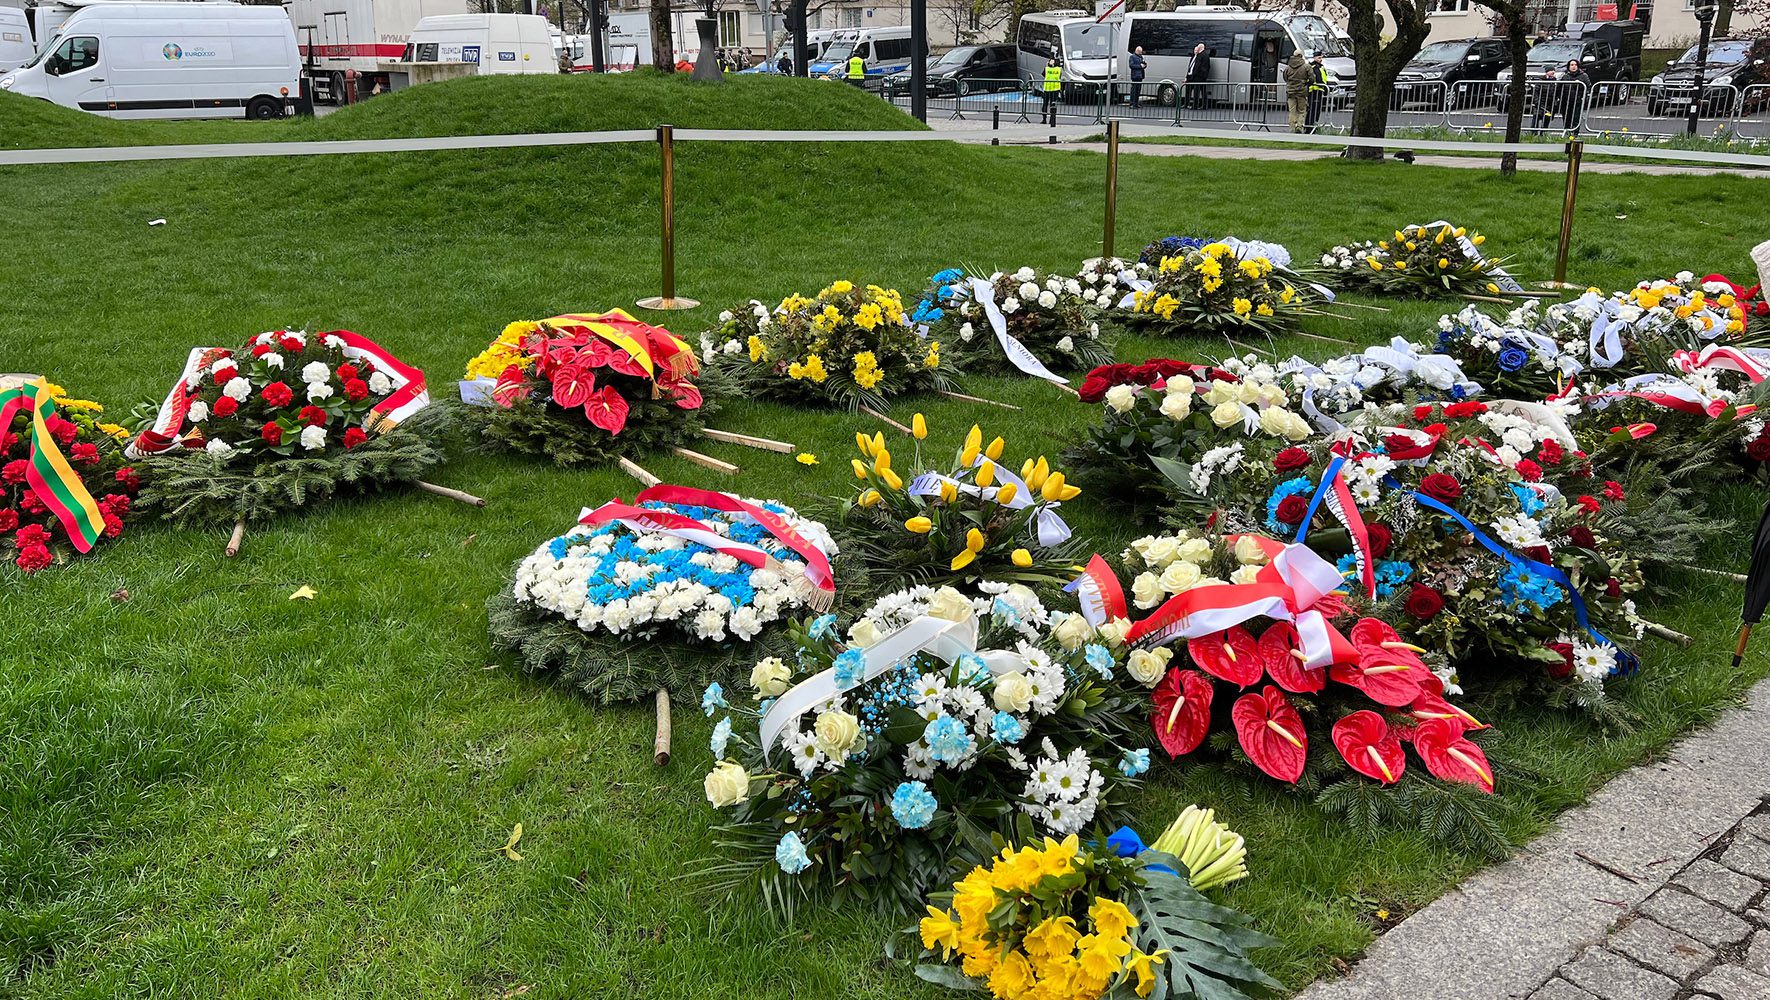 Flowers at the commemoration event for the 80th anniversary of the uprising of the Warsaw Ghetto during WWII.